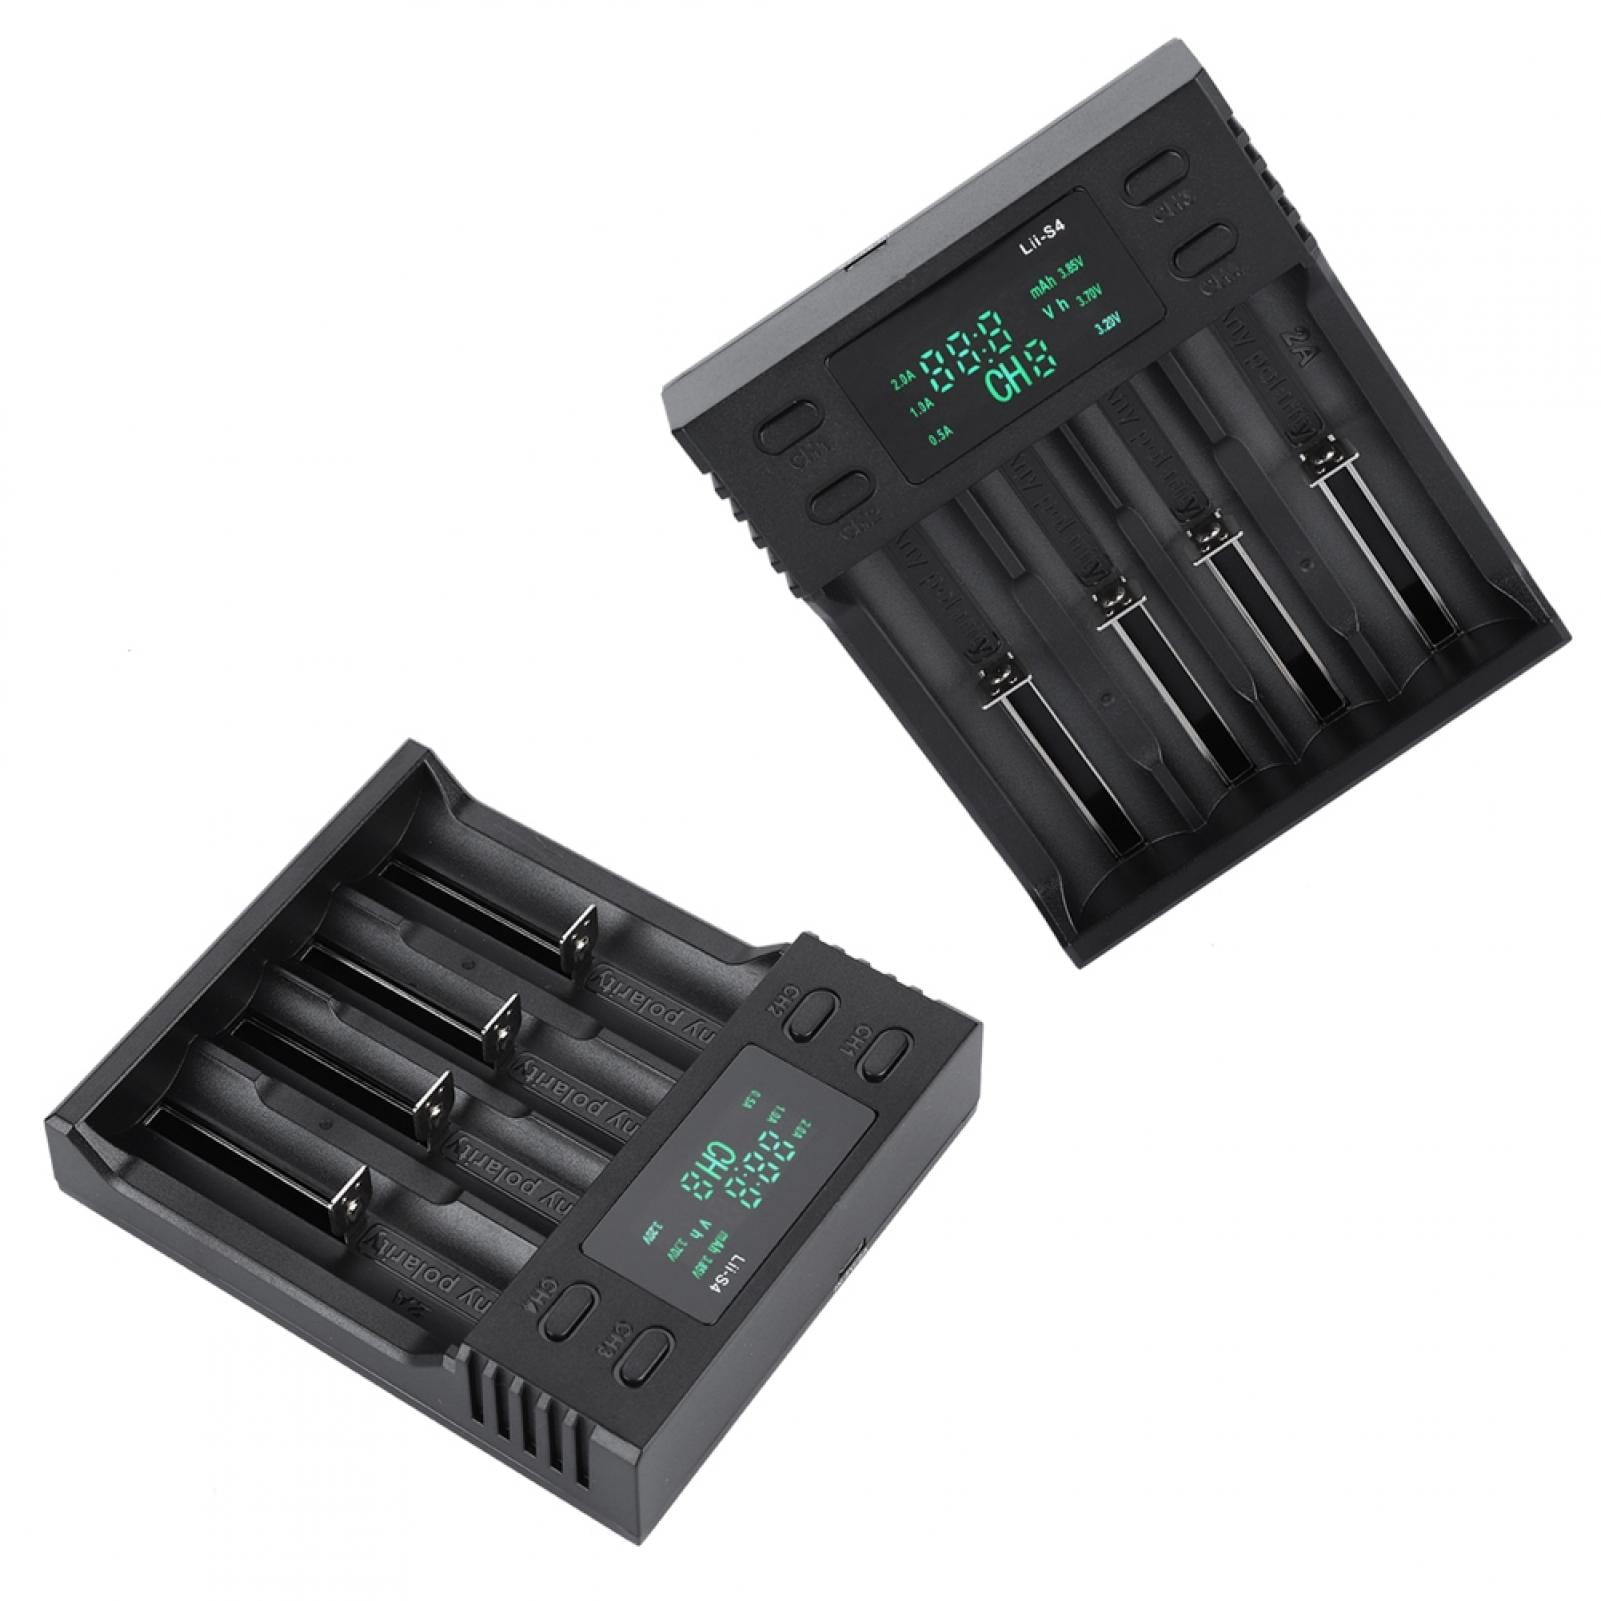 Liitokala Lii-S4 4 Slots LCD Smart Charger Intelligent Battery Charger Y4Z7 